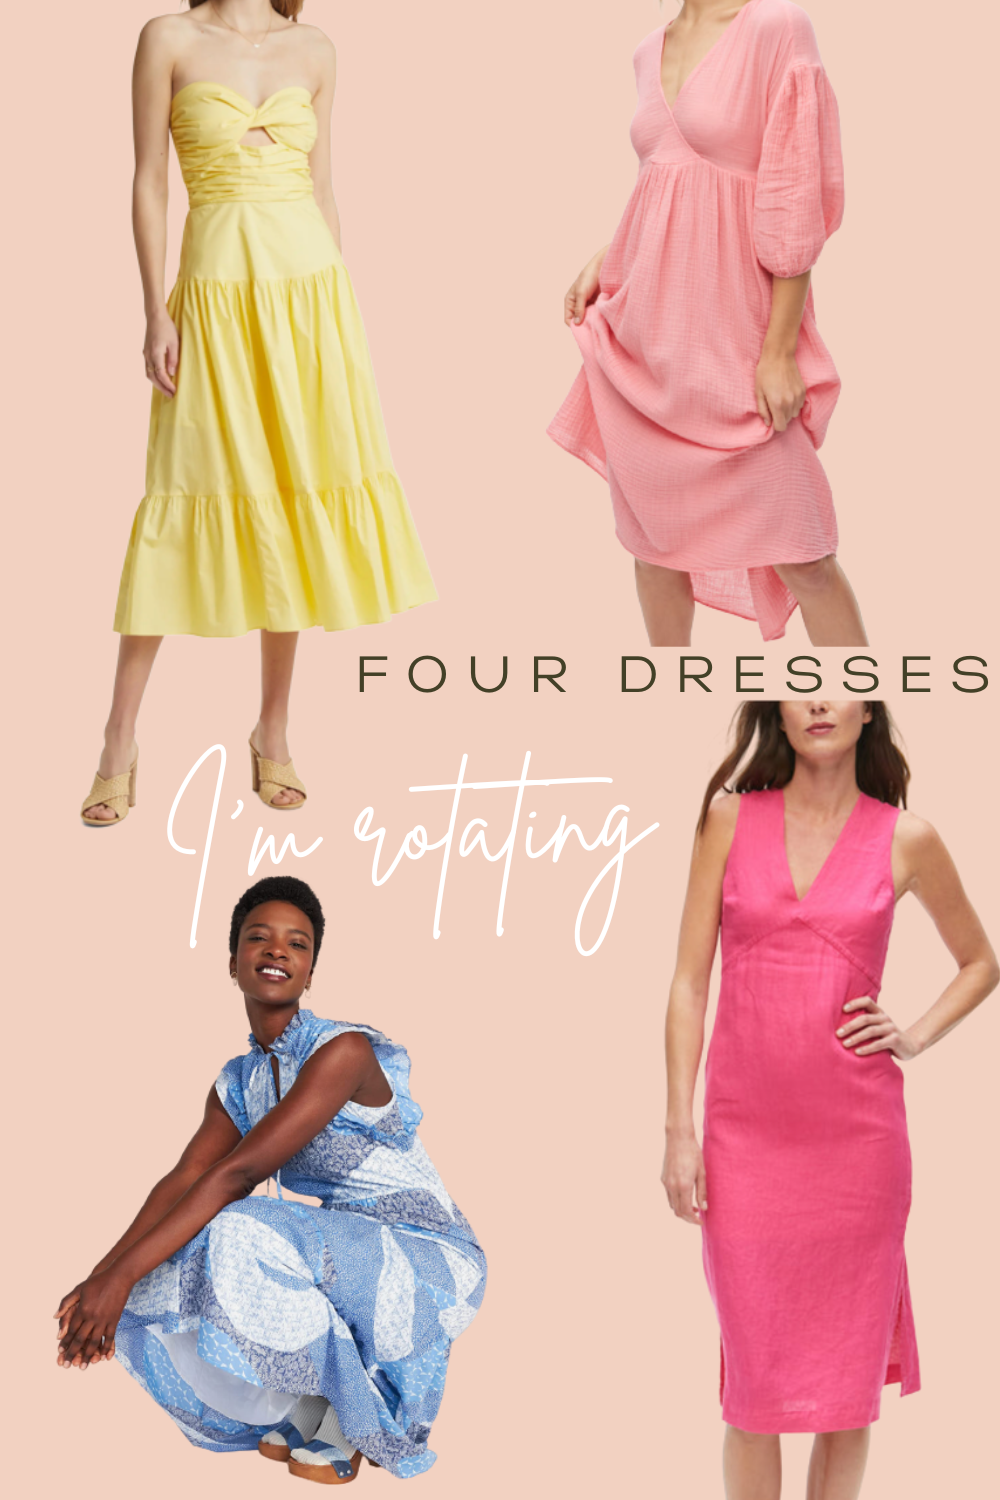 four dresses I’m currently rotating